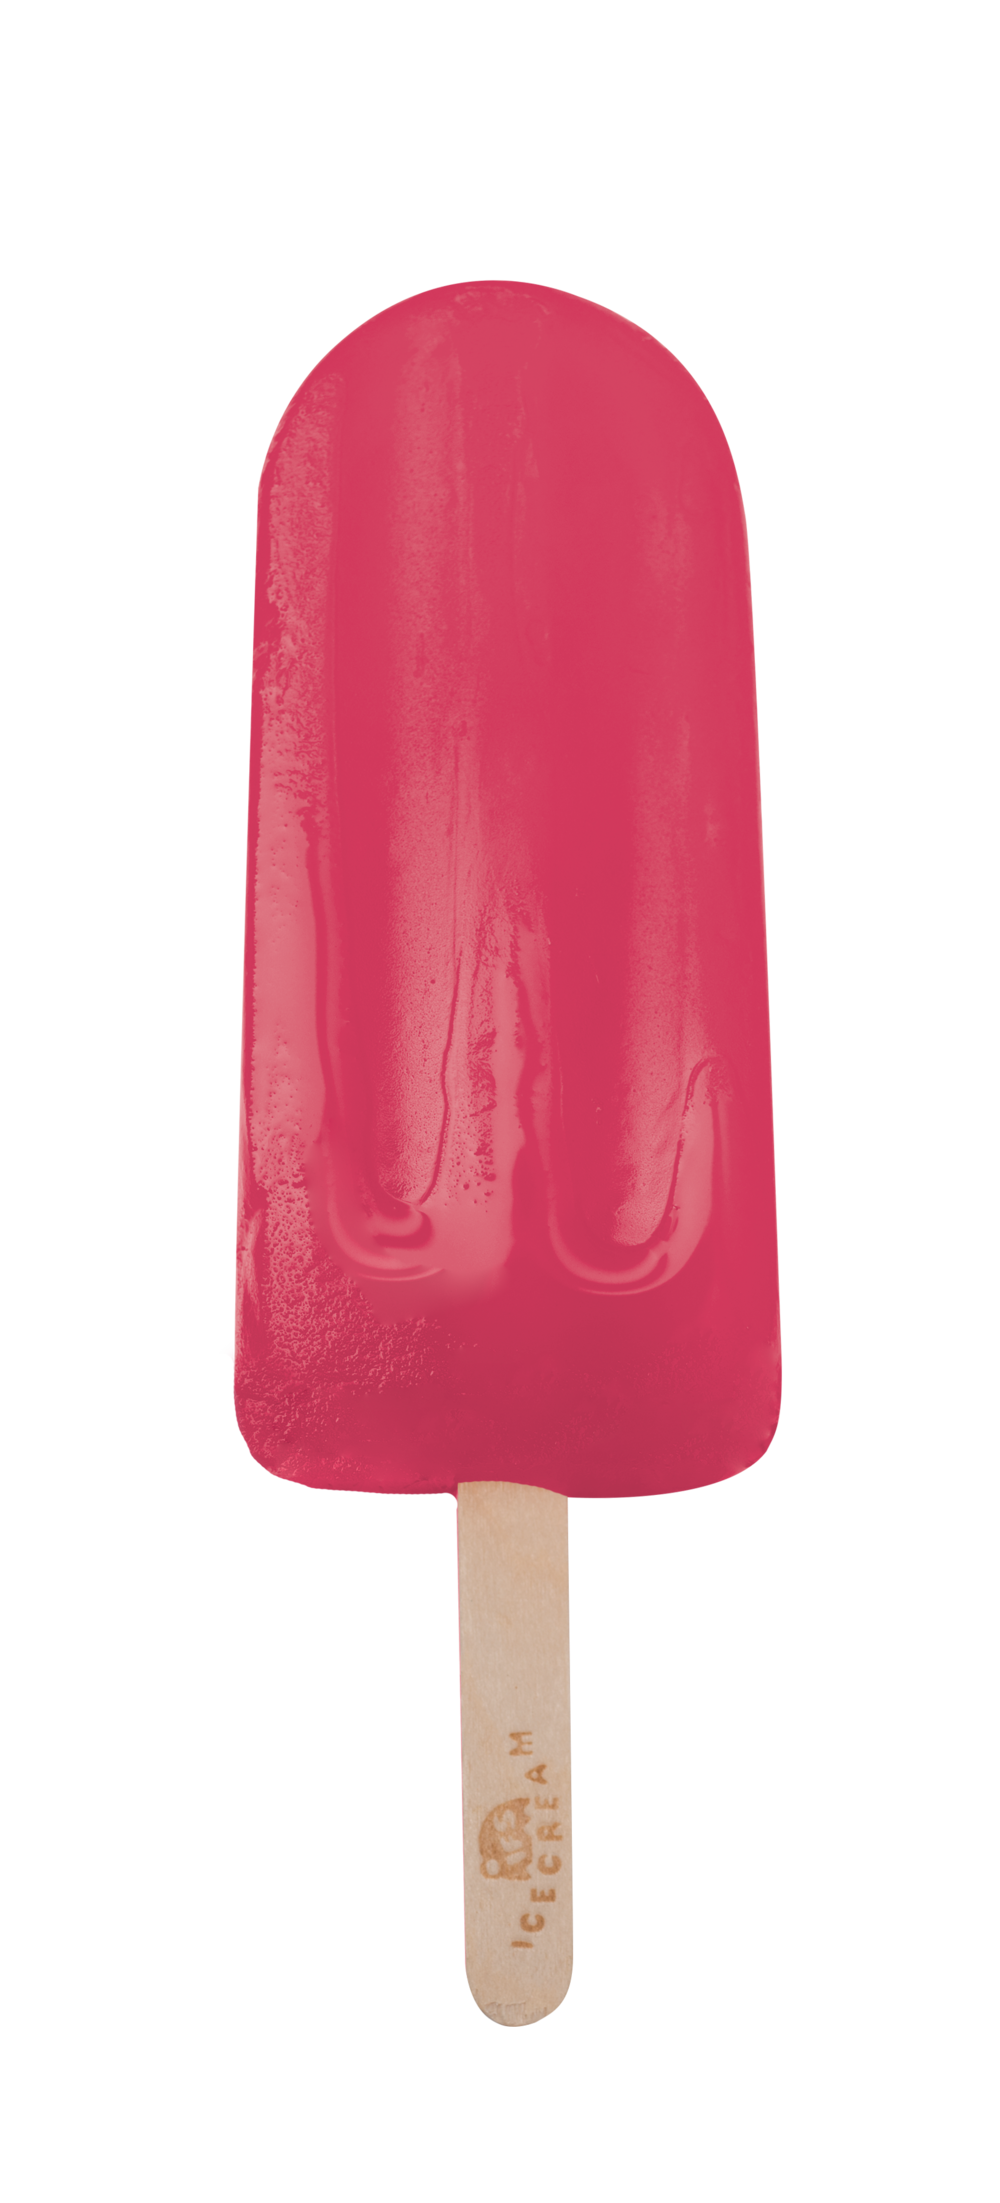 Pink Ice Pop PNG High-Quality Image